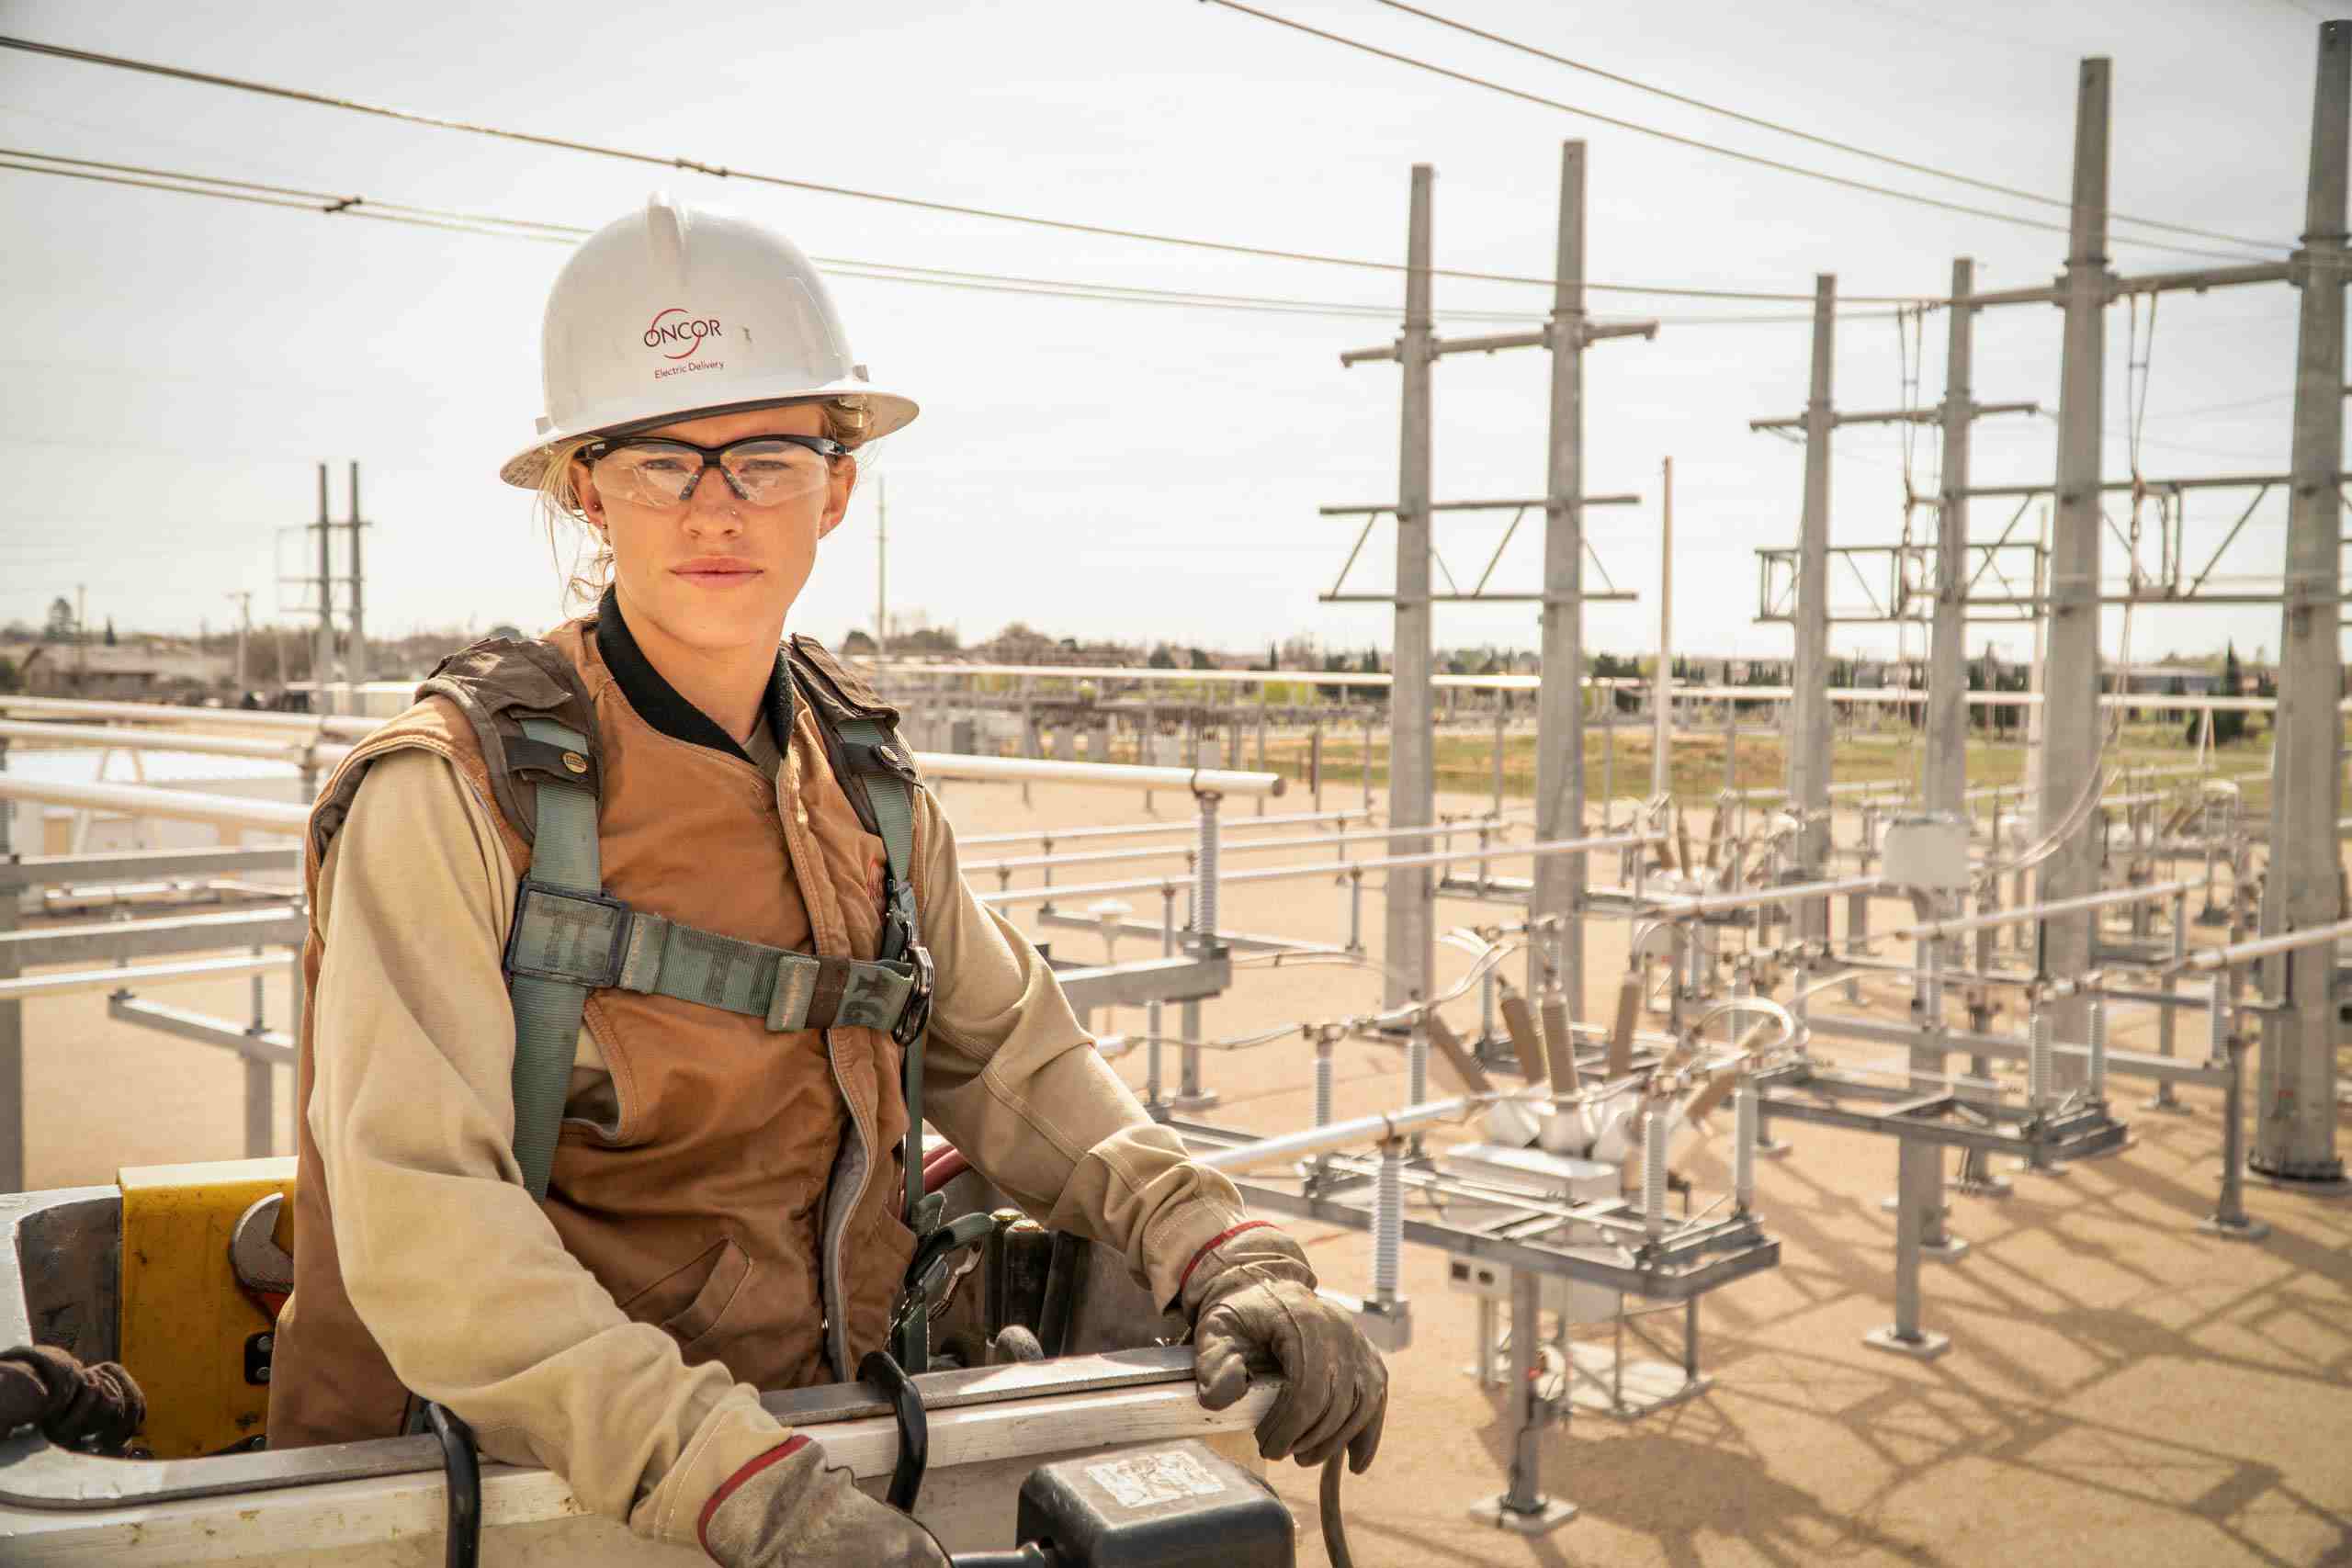 Pioneering Spirit: Powerful Portrait of Female Oncor Employee with Grid in the Background